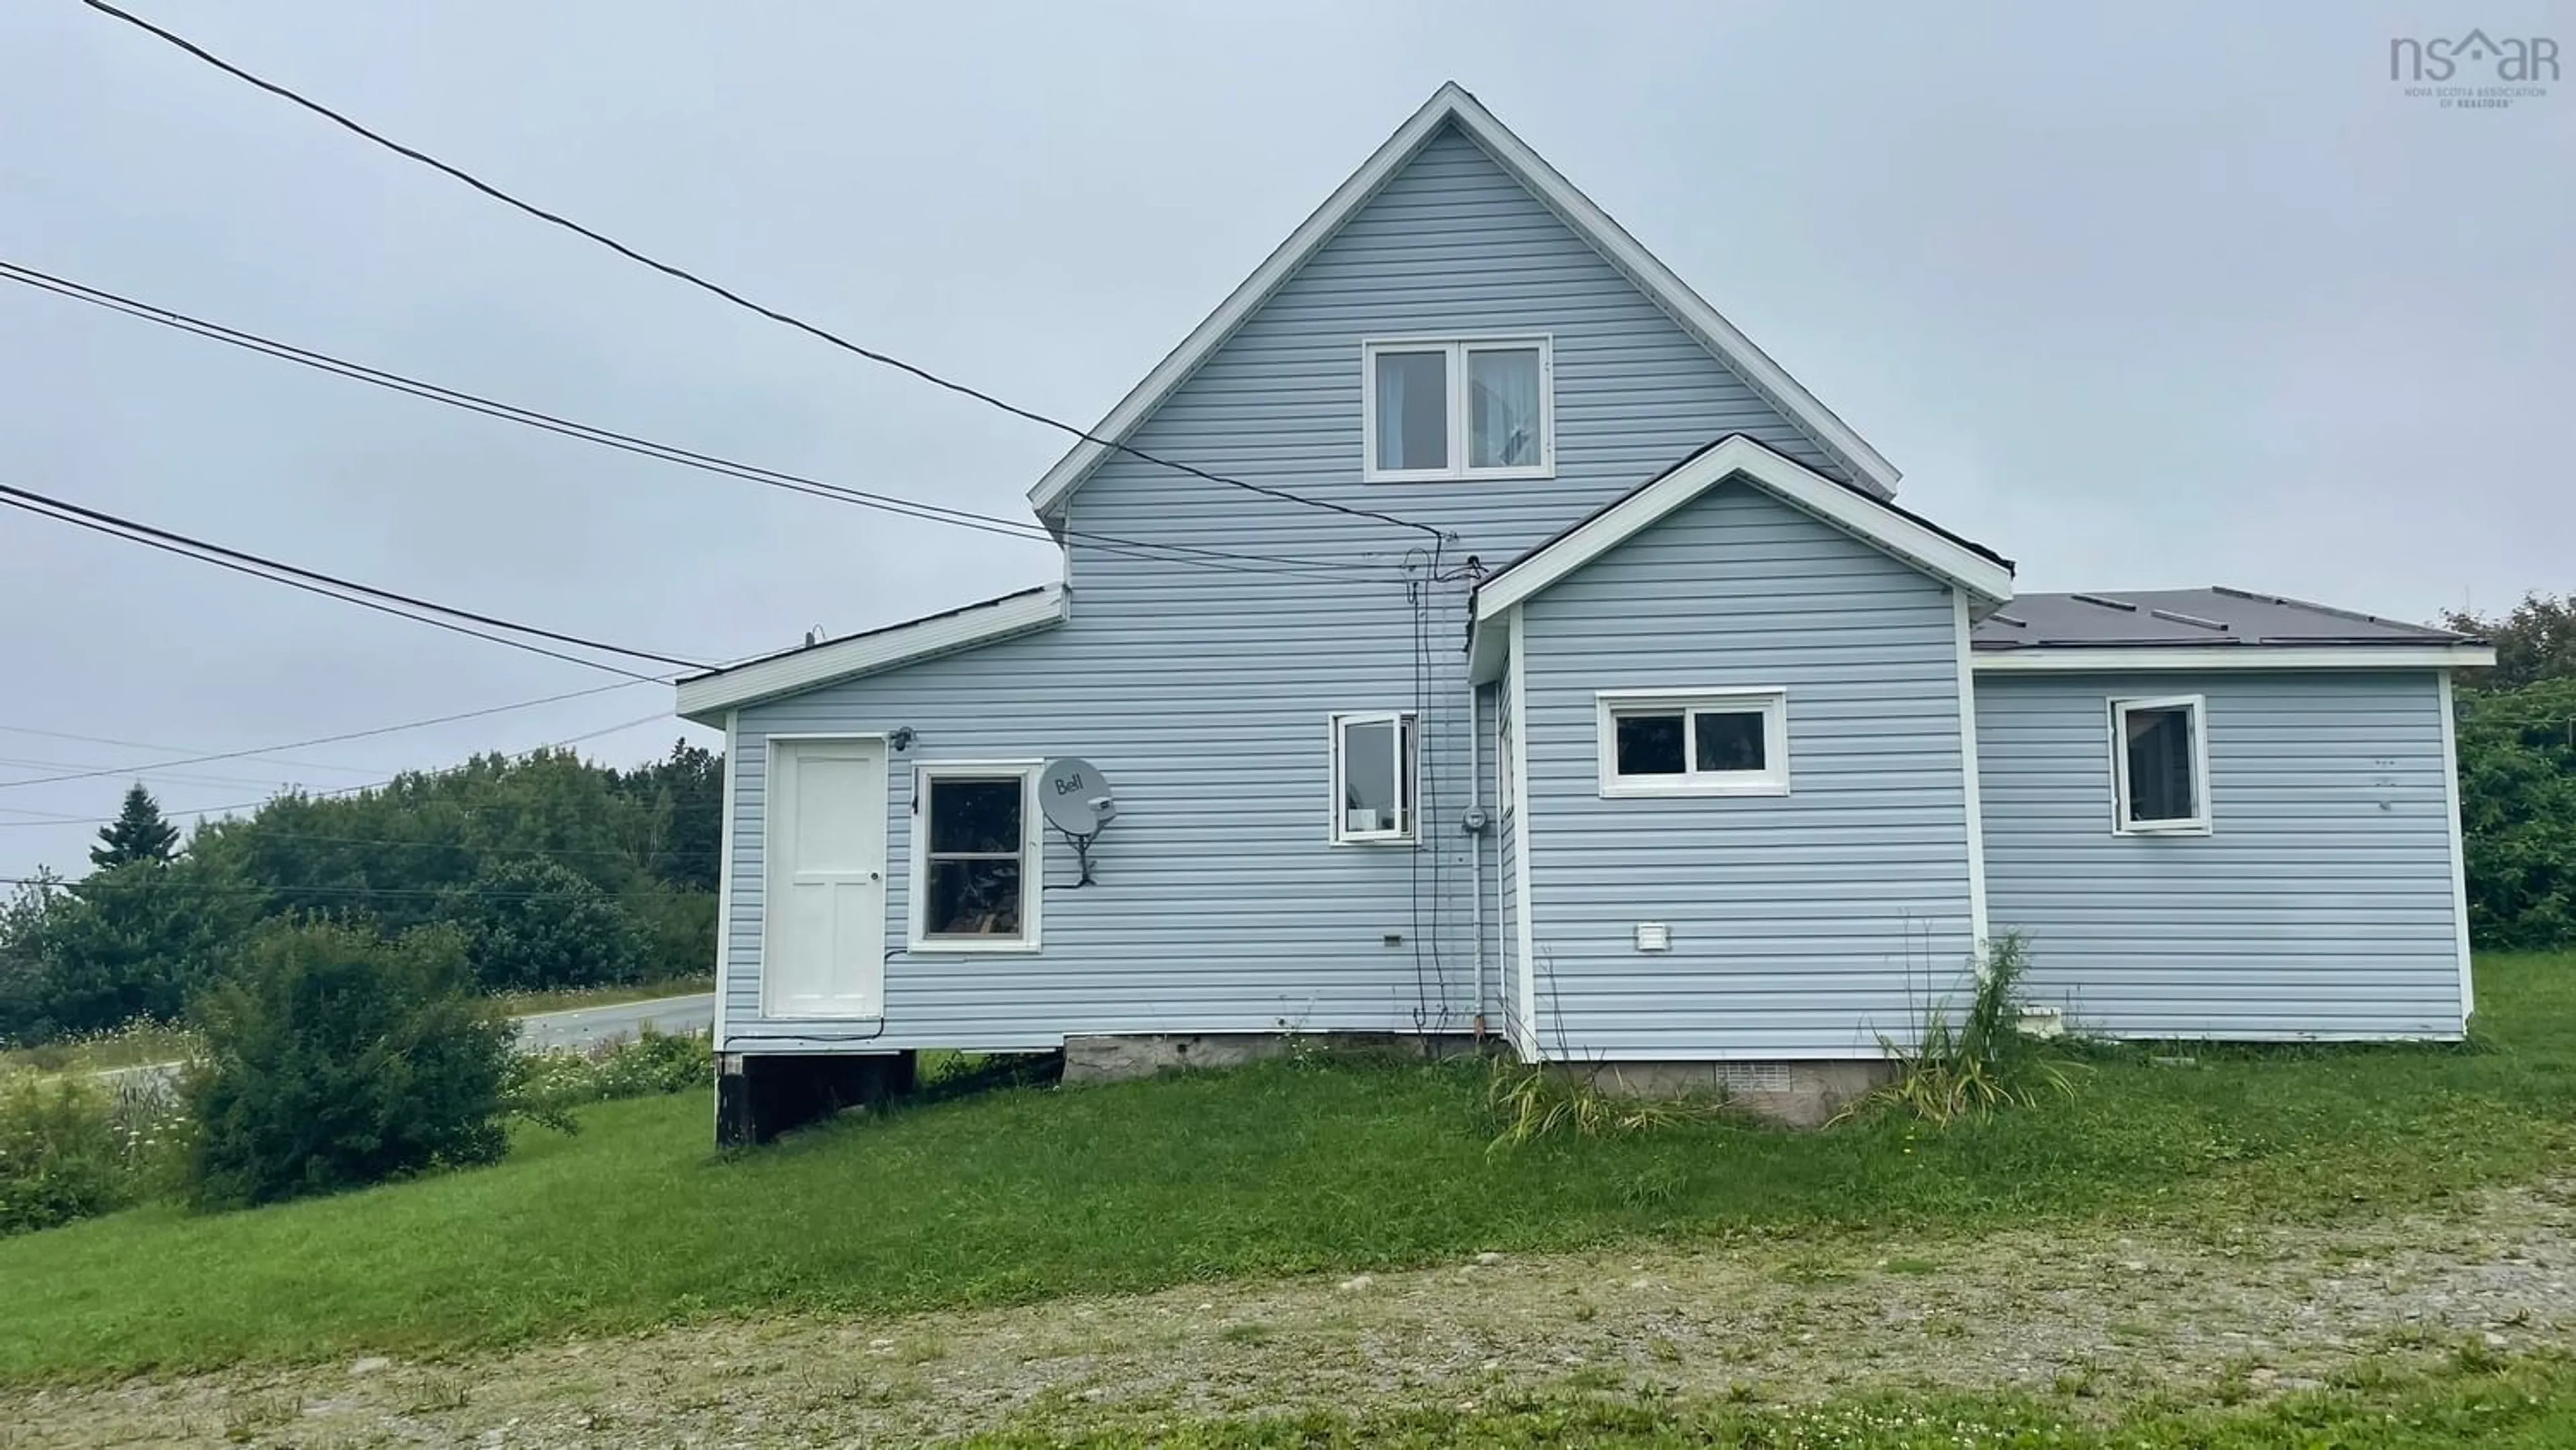 Frontside or backside of a home for 6674 Highway 101, Gilberts Cove Nova Scotia B0W 2R0